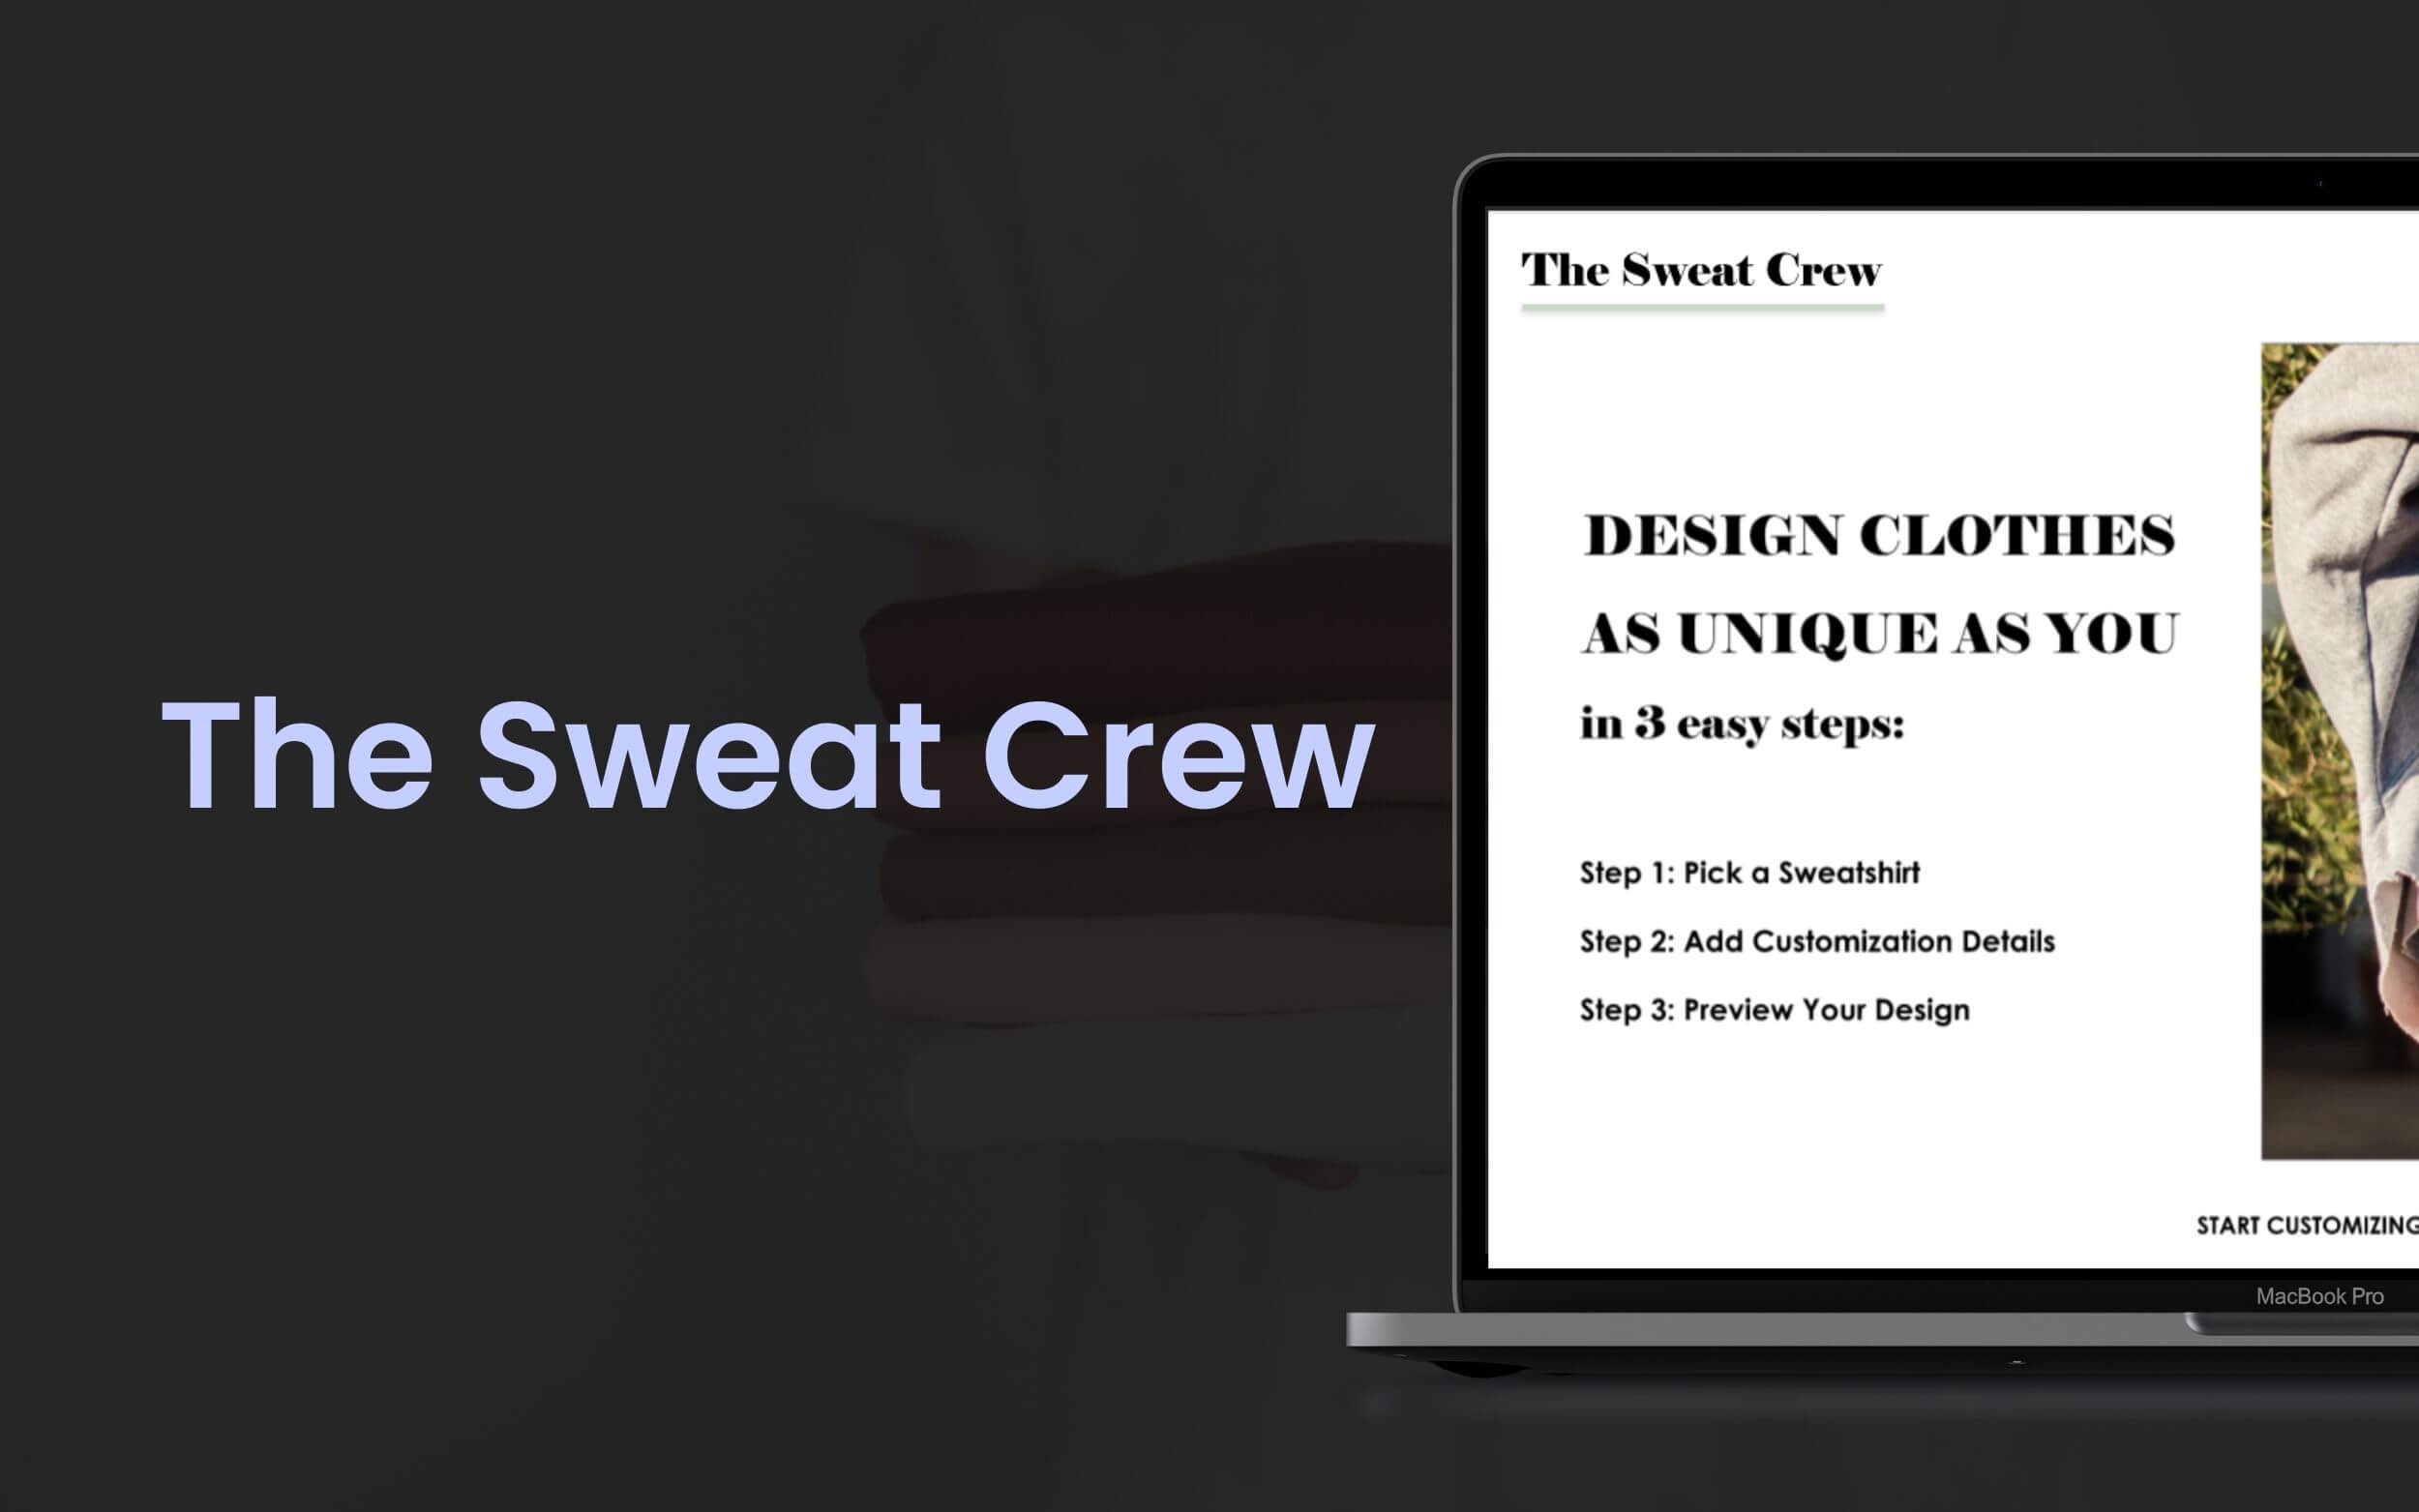 Cover Photo of The Sweat Crew text next to desktop screenshot of The Sweat Crew's home page on top of a dim background.